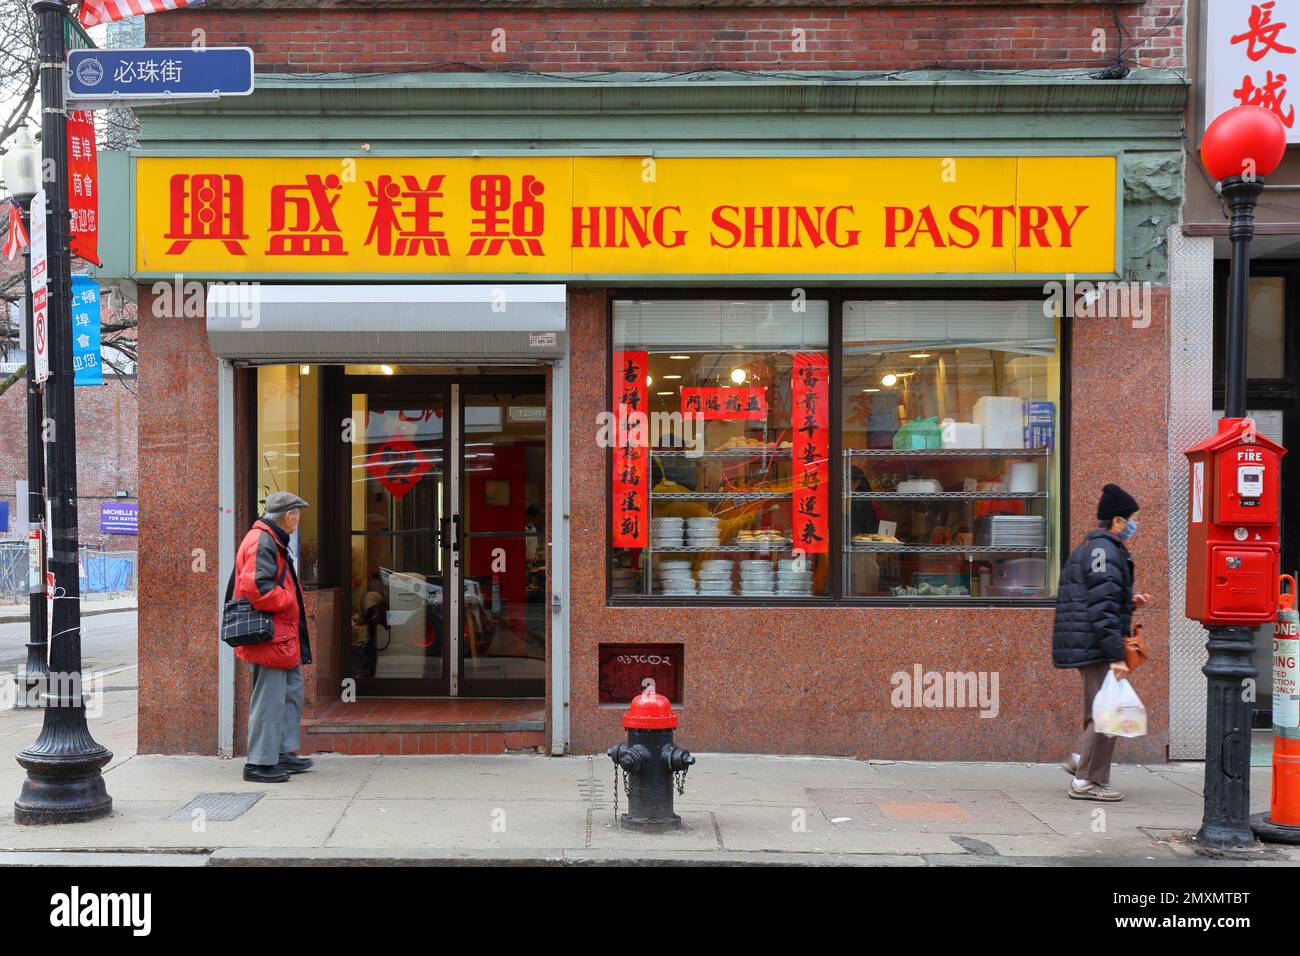 Hing Shing Pastry 興盛糕點, 67 Beach St, Boston, Massachusetts. exterior storefront of a Chinese bakery in Chinatown. Stock Photo